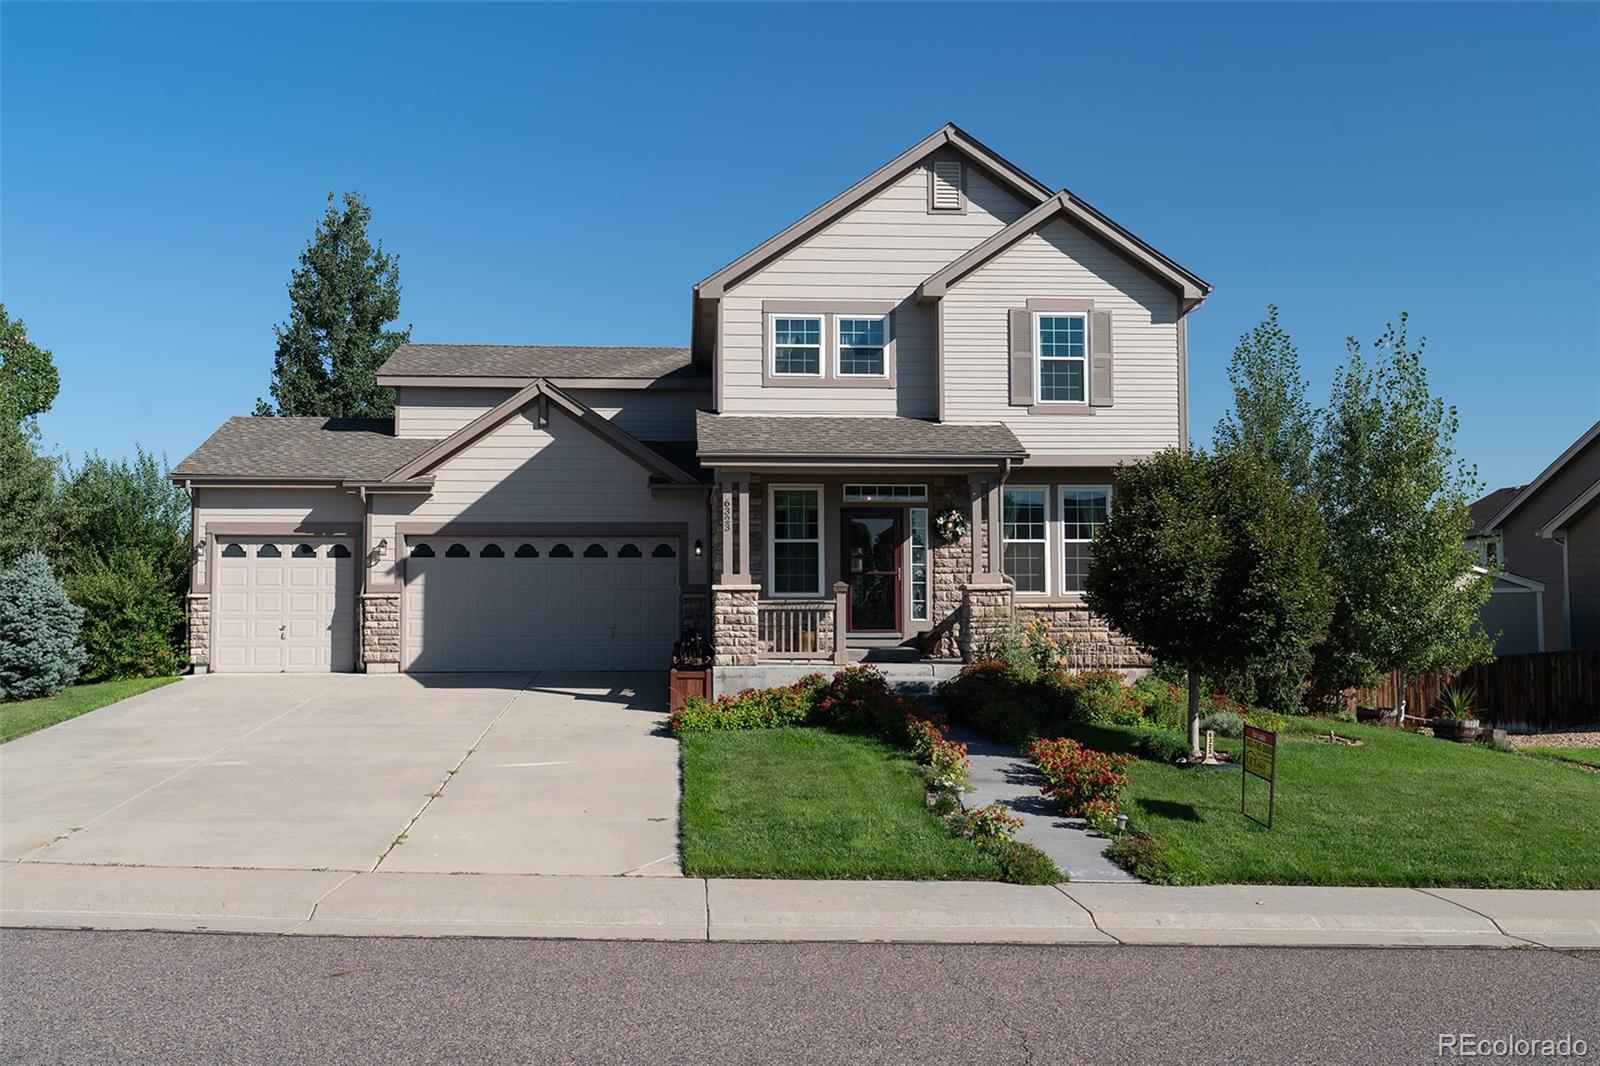 6323 E 126th Place, thornton MLS: 3529955 Beds: 3 Baths: 3 Price: $669,000